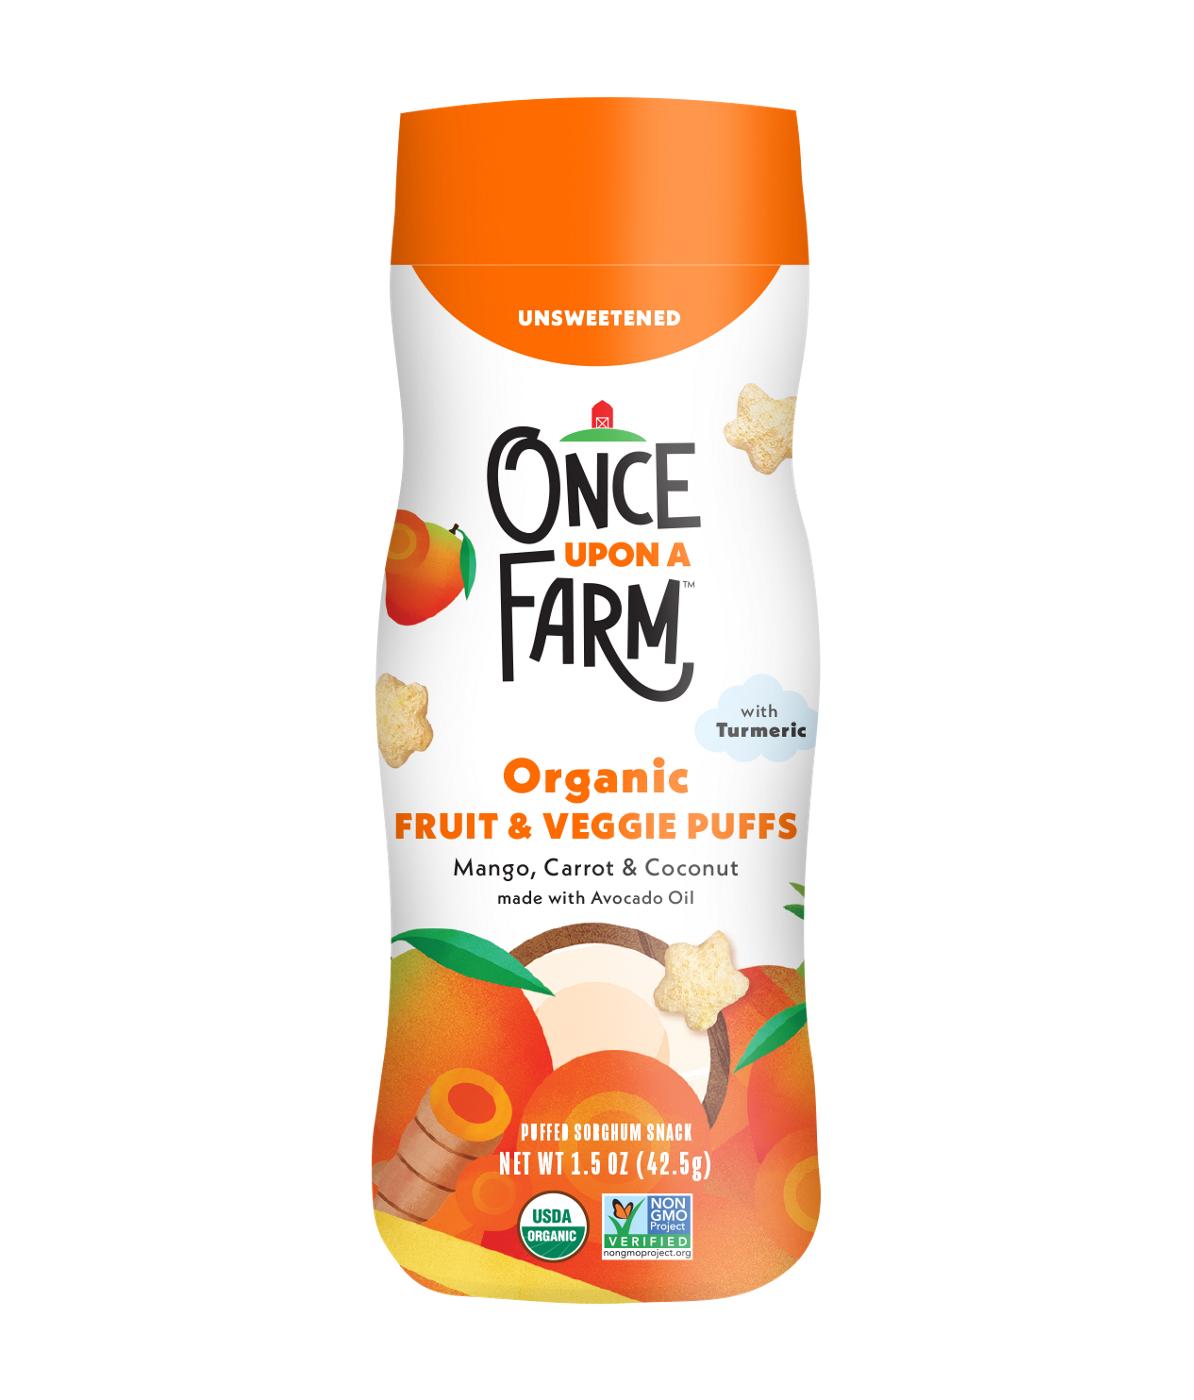 Once Upon a Farm Organic Fruit & Veggie Puffs - Mango, Carrot & Coconut; image 1 of 3